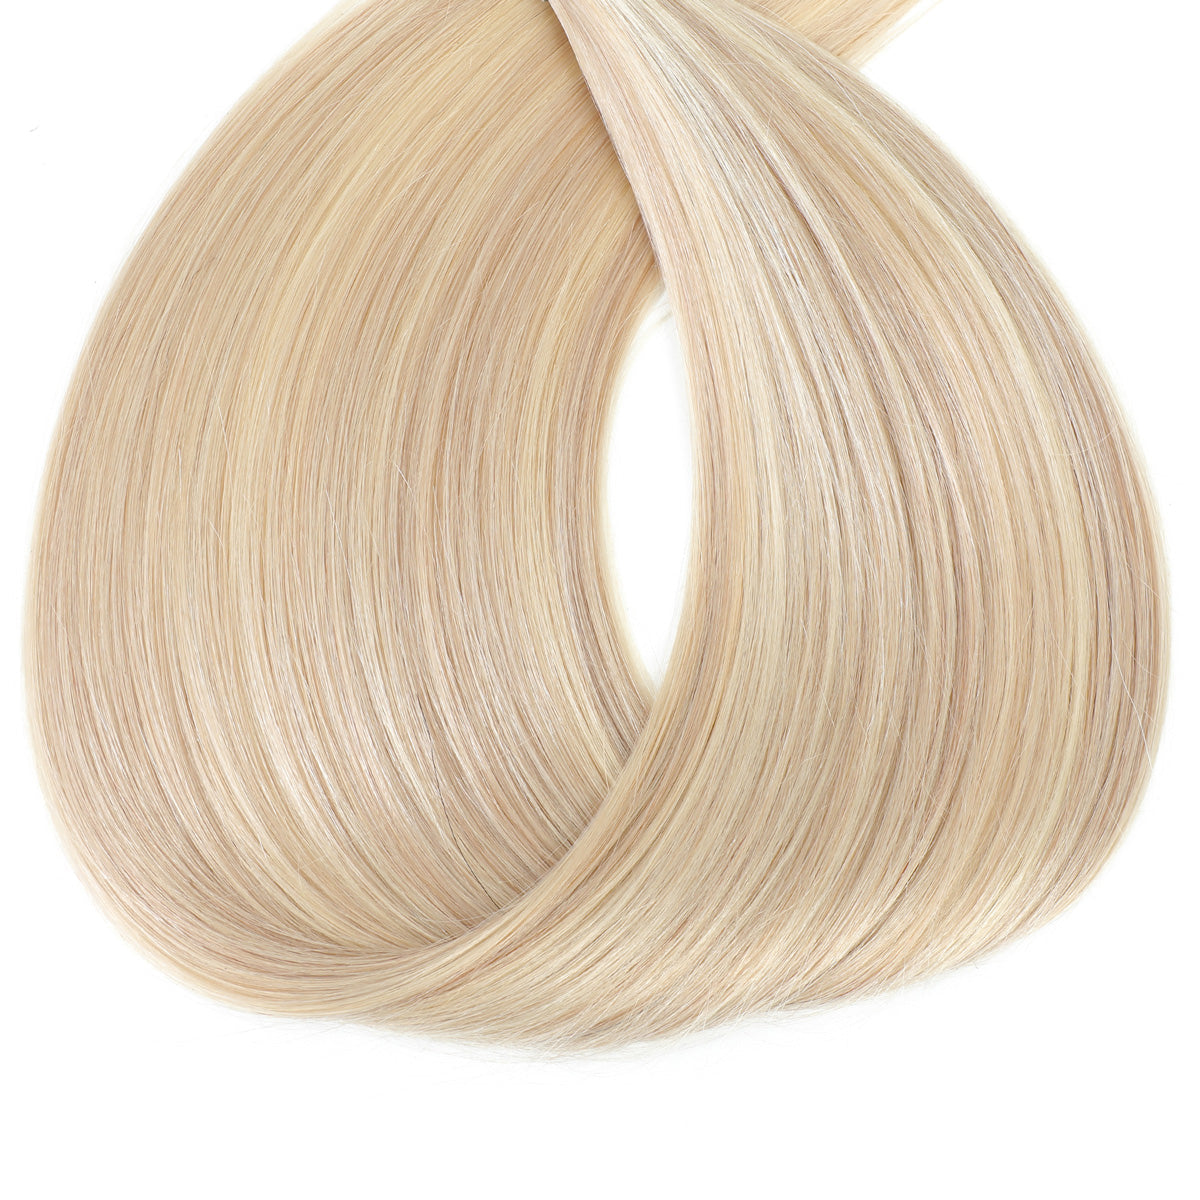 Weft Human Hair Extensions for Sale